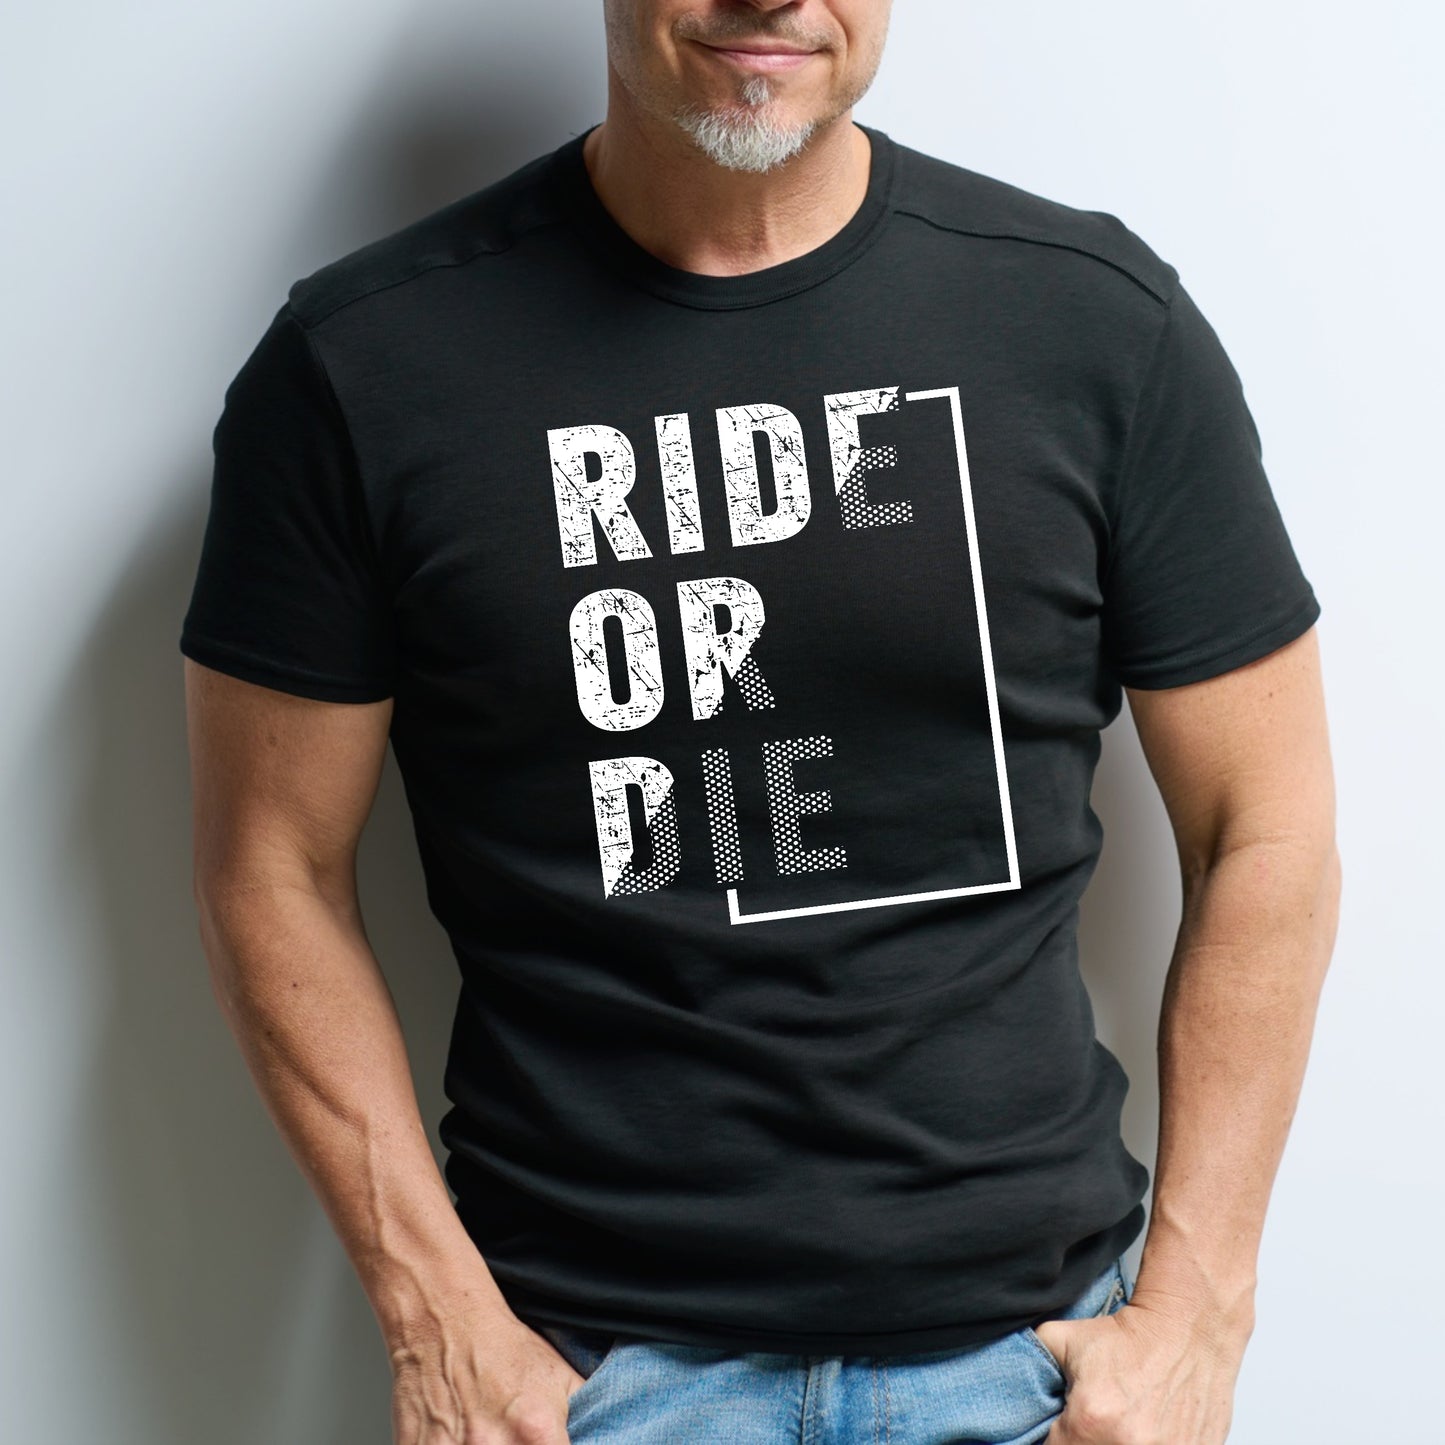 Motorcycle T-Shirt For Bike Rally TShirt For Biker T Shirt Chopper Shirt Motorcyclist Shirt Ride Or Die Shirt For Biker Gift